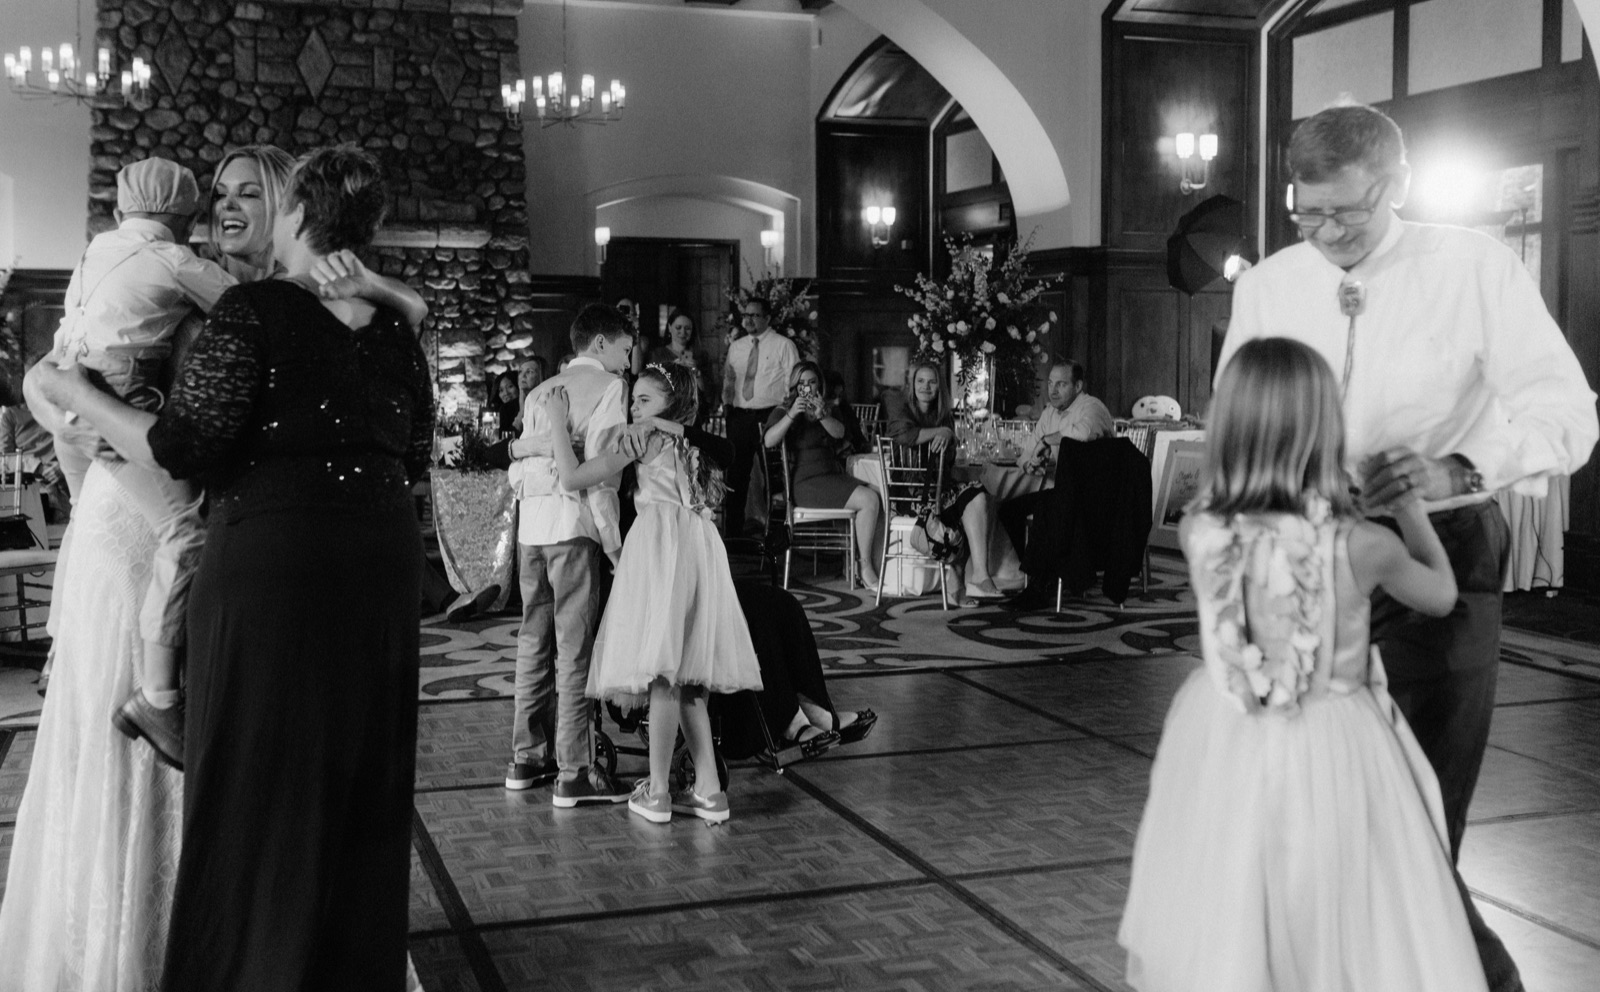 Grandparent dance for a blended family wedding tradition in Banff